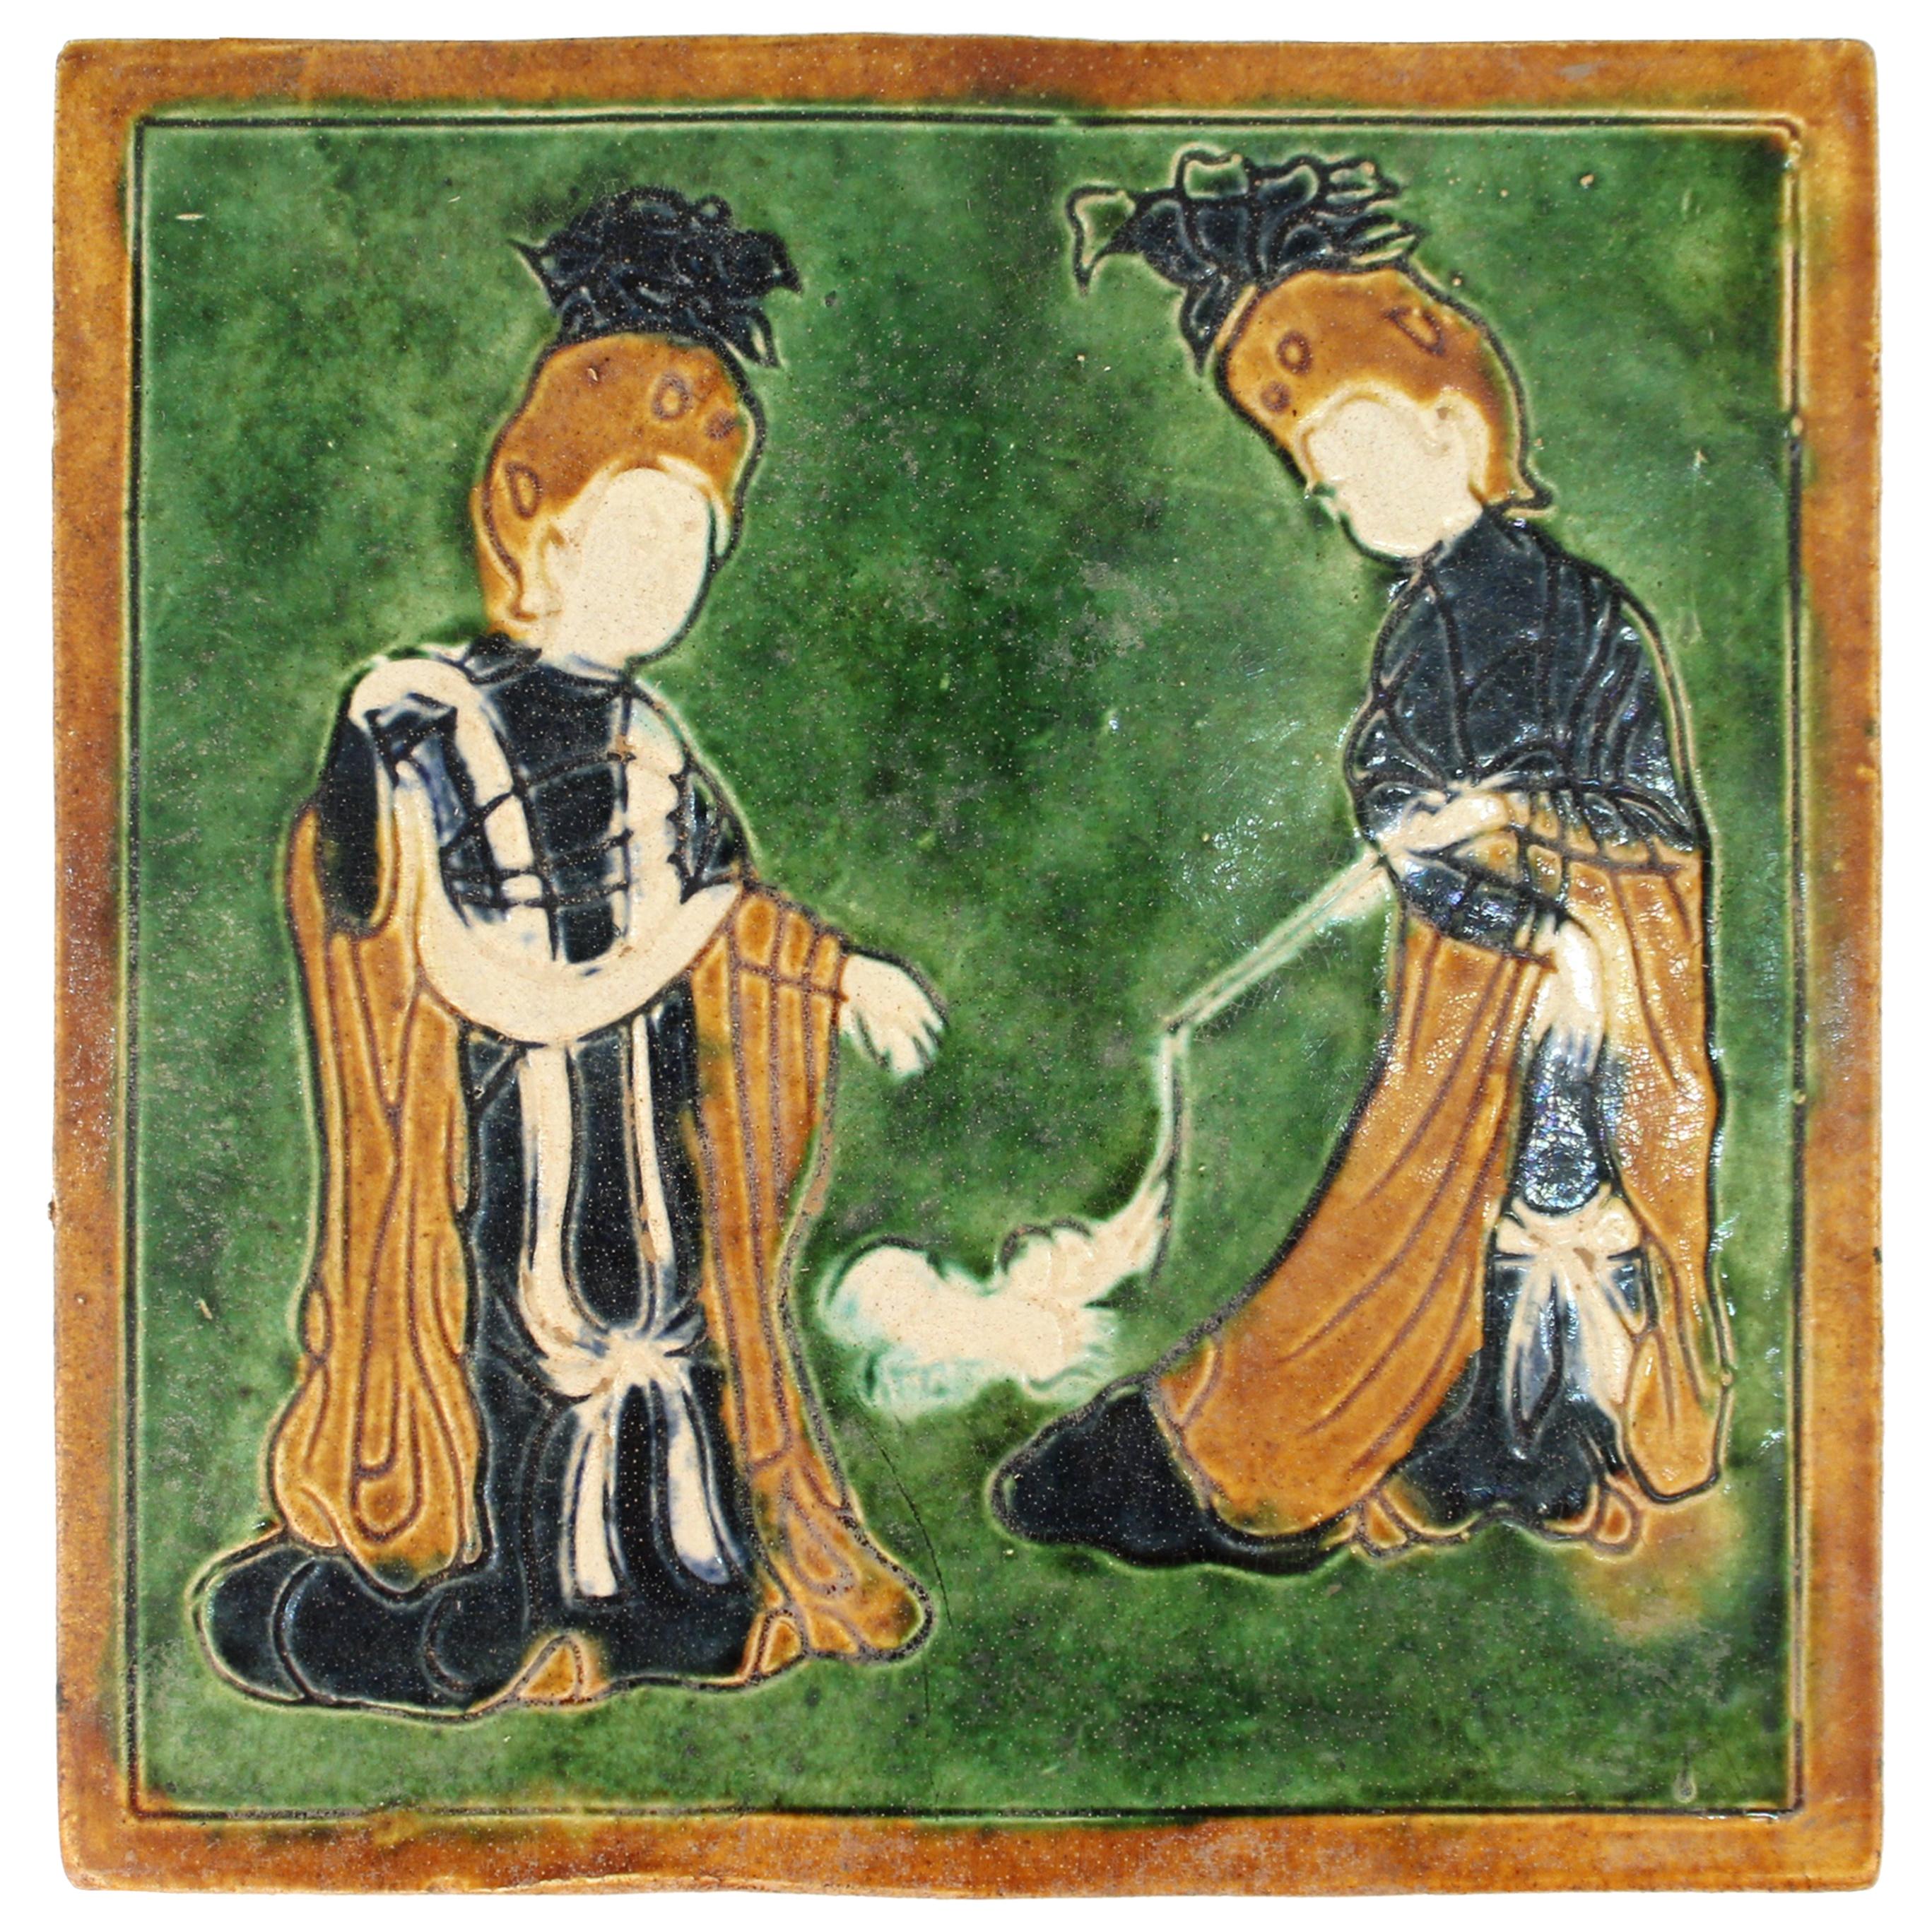 Chinese Tang Style Sancai-Glazed Flat Tile Depicting Women Playing with a Dog